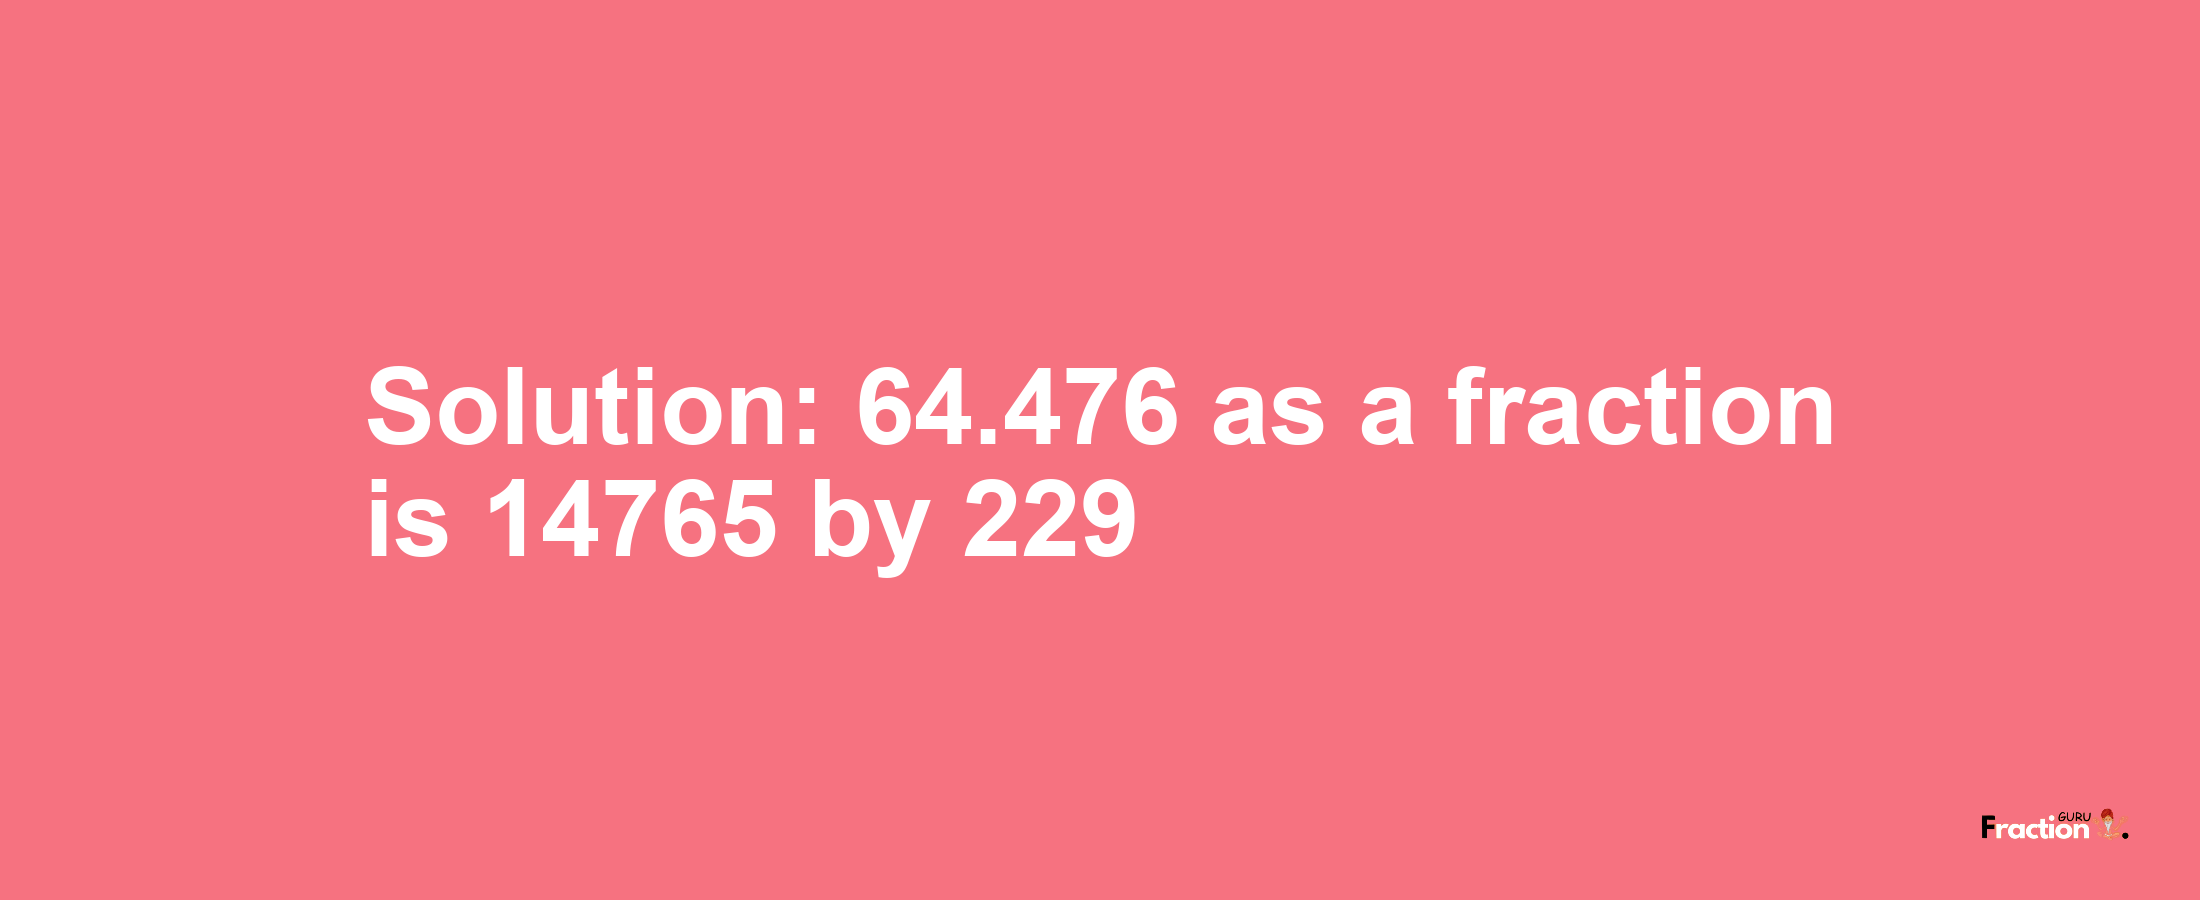 Solution:64.476 as a fraction is 14765/229